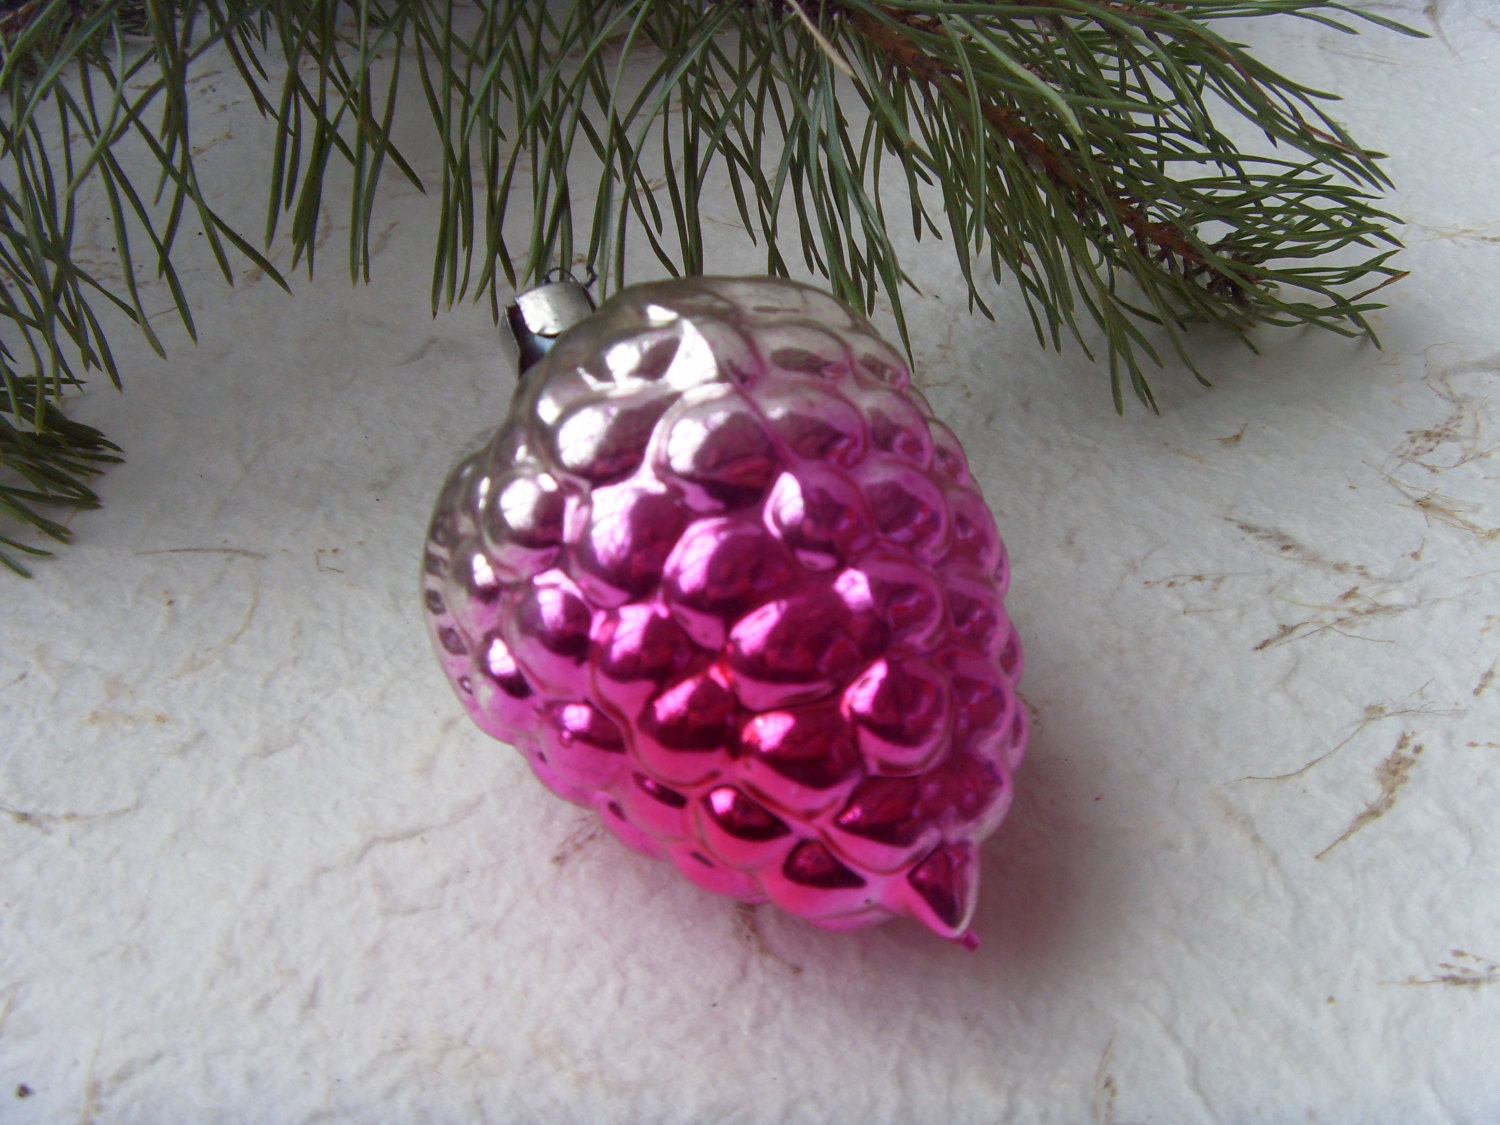 Rare Soviet Vintage Pink Grapes Christmas Ornament, Made of Glass in USSR in 1970s. - Astra9